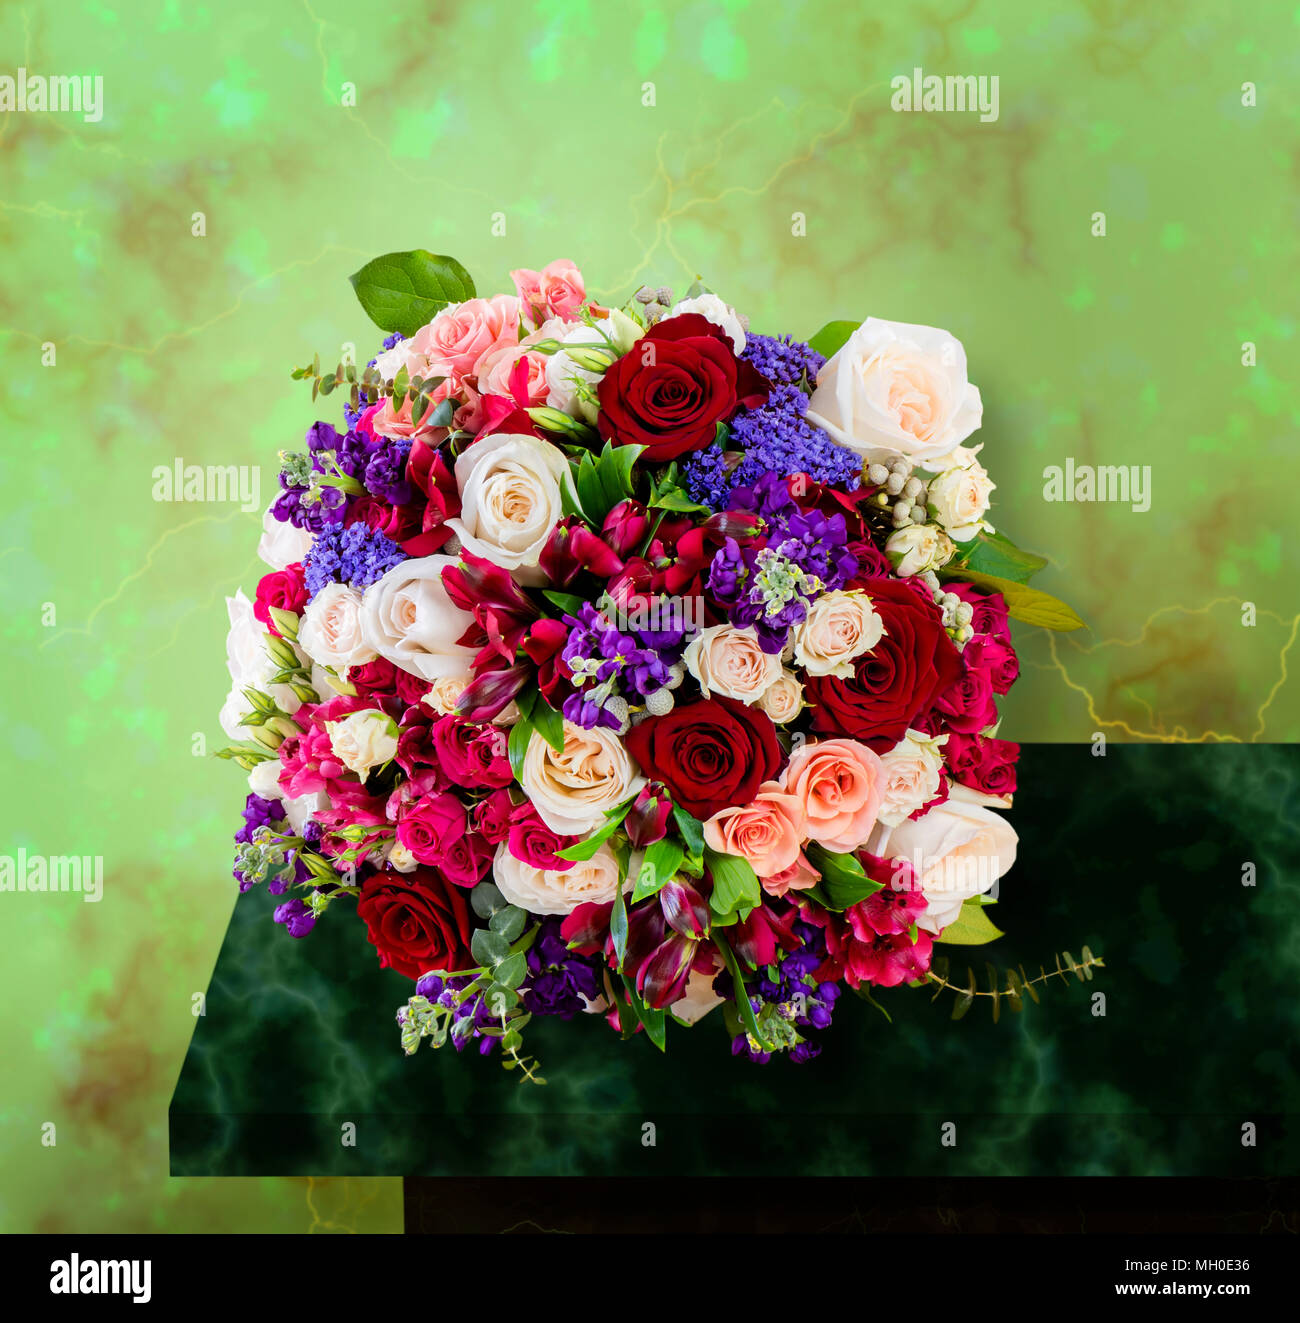 top view of a beautiful bouquet of flowers, multi-colored roses with green leaves, standing on a marble table Stock Photo